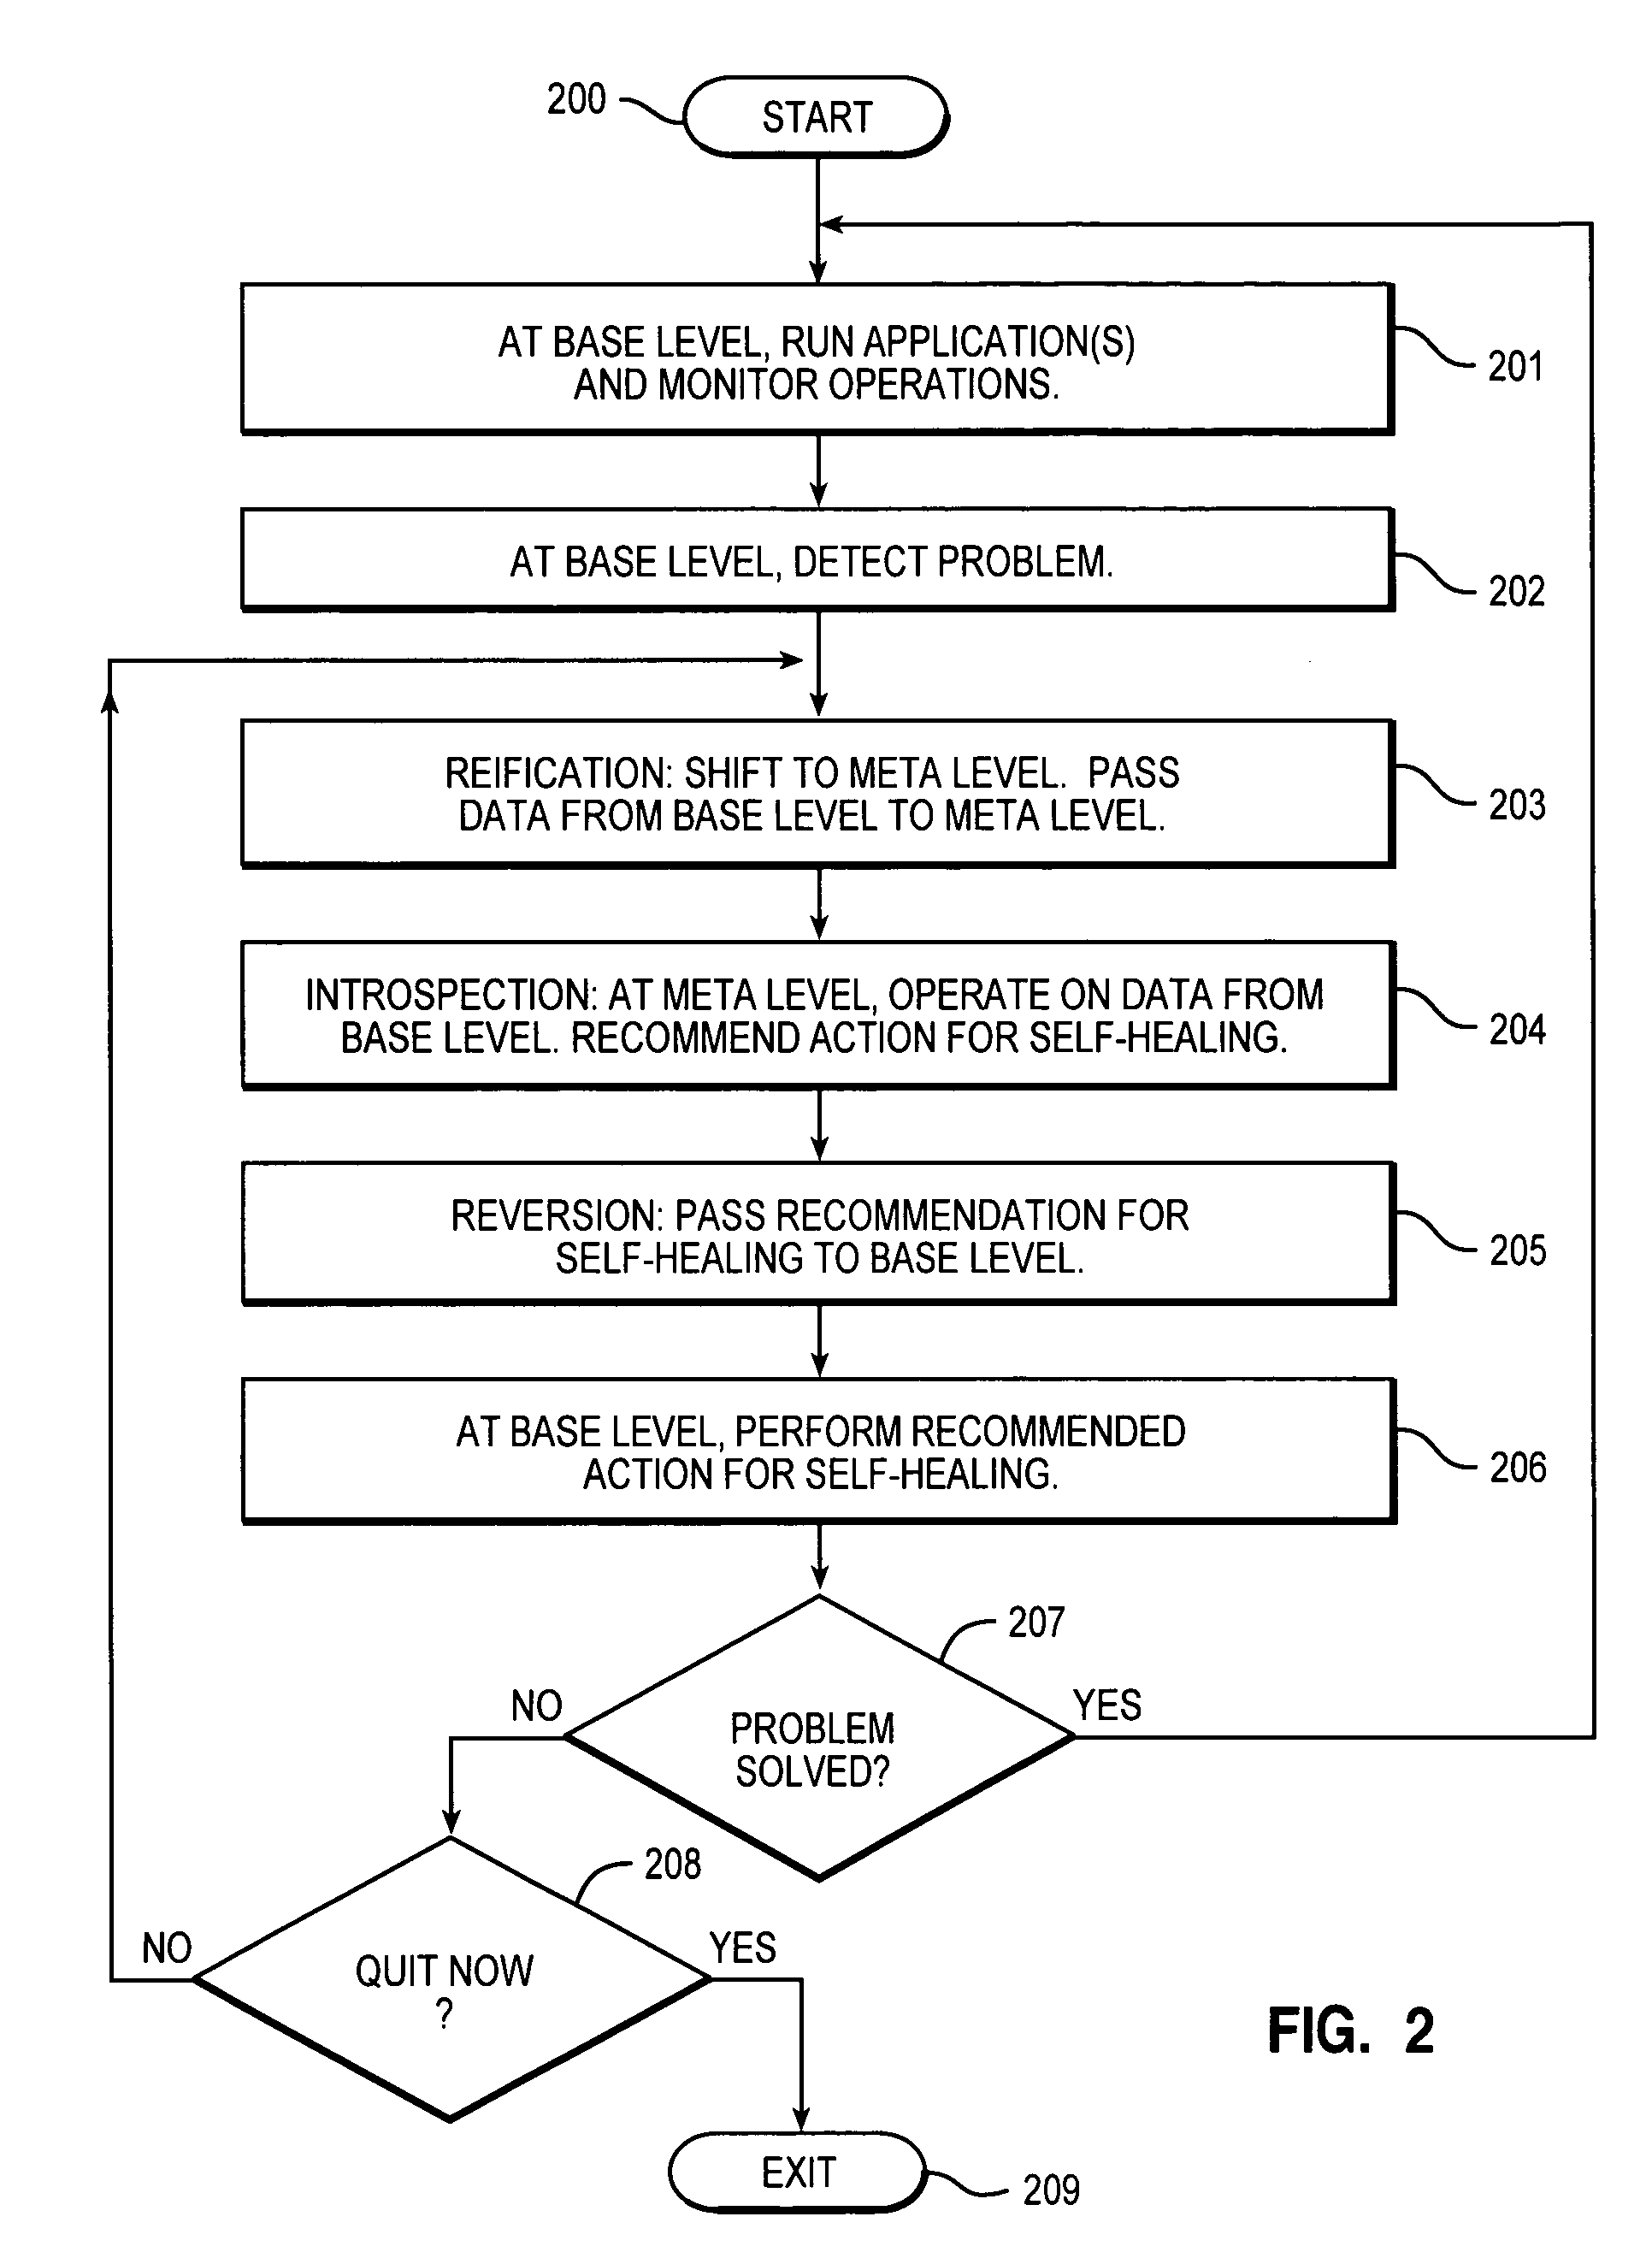 System and method for achieving autonomic computing self-healing, utilizing meta level reflection and reasoning